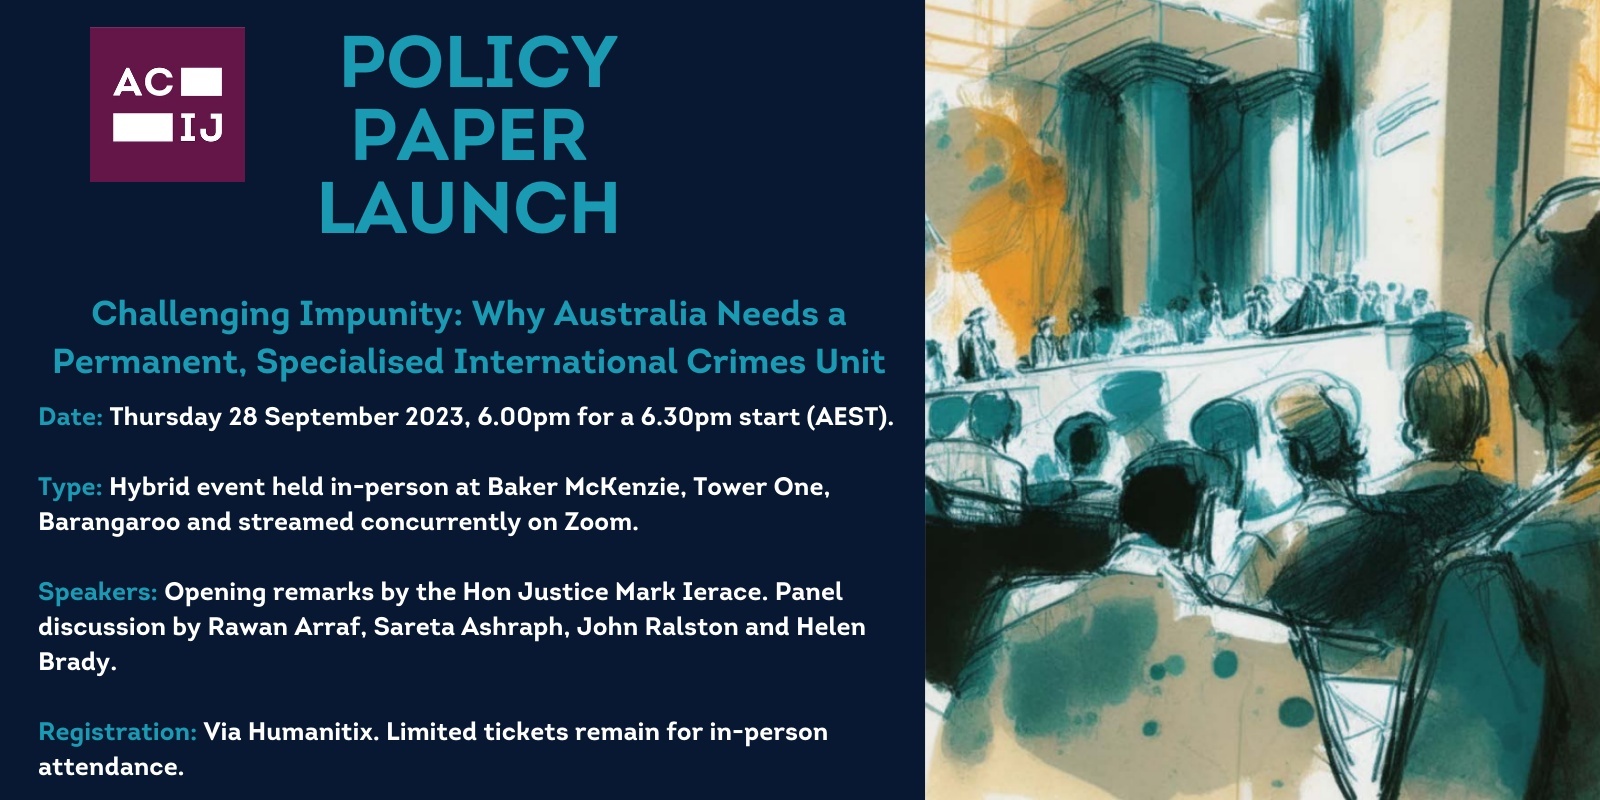 Banner image for ACIJ Policy Paper Launch - Challenging Impunity: Why Australia Needs a Permanent, Specialised International Crimes Unit 